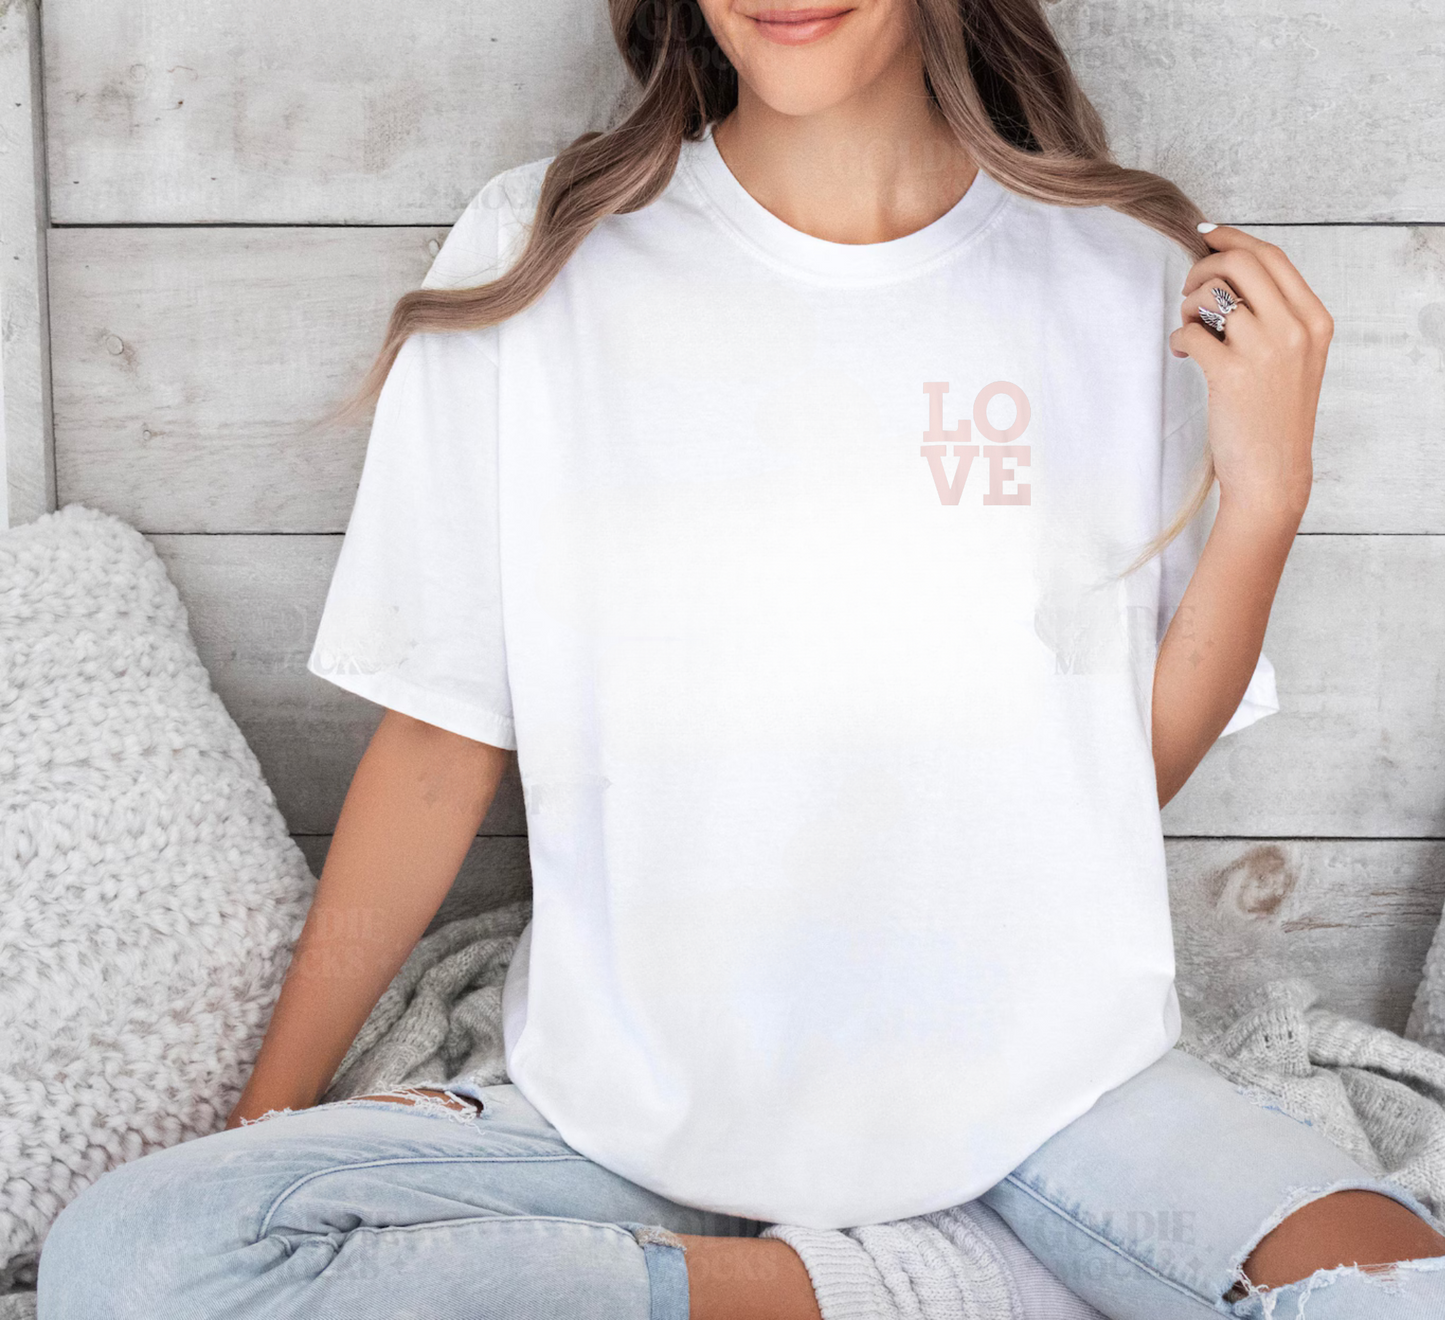 LOVE Graphic T-Shirt - Comfort Colors 1717, 100% Ring-Spun Cotton, Relaxed Fit